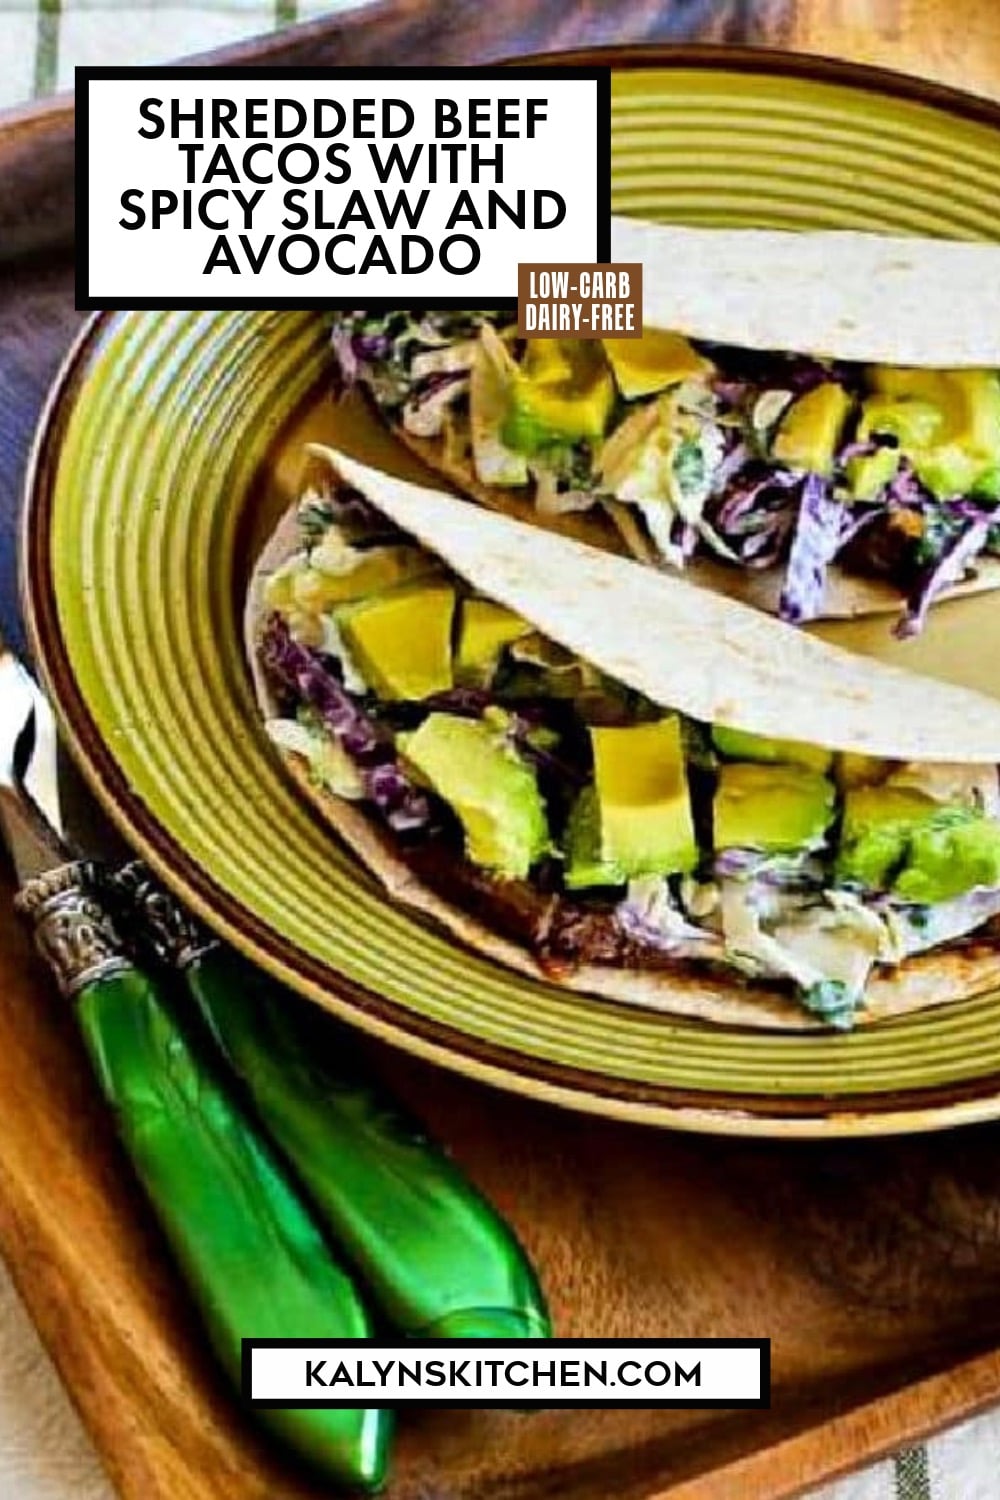 Pinterest image of Shredded Beef Tacos with Spicy Slaw and Avocado